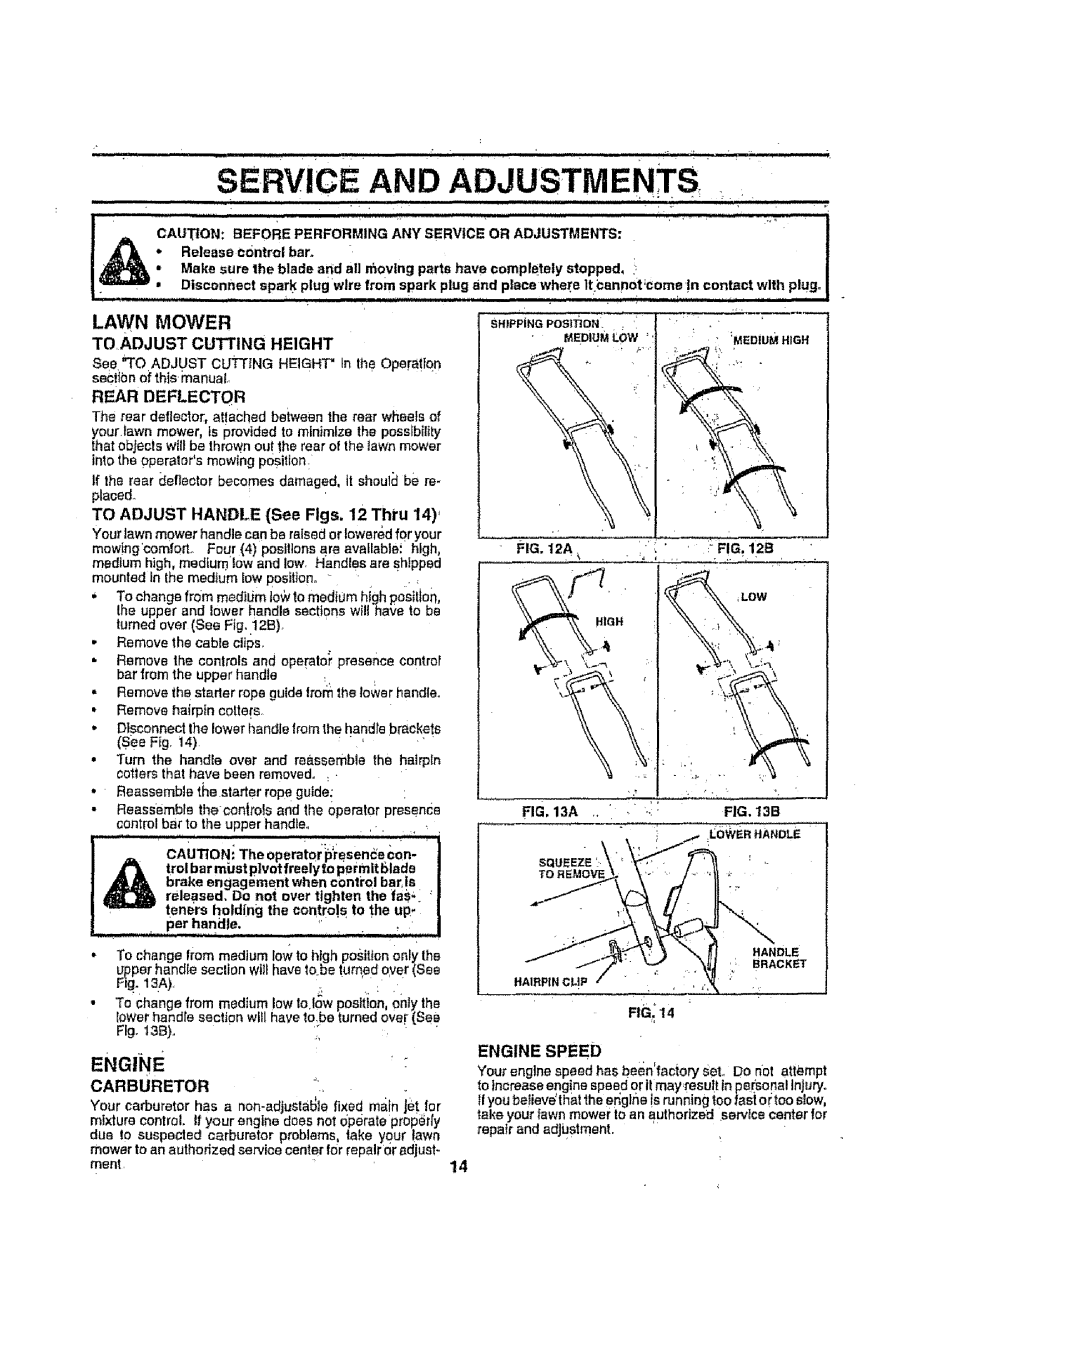 Sears 917386121 Service, And Adjustments, Lawn Mower To Adjust Cutting Height, Rear Deflector, Carburetor, Engine Speed 